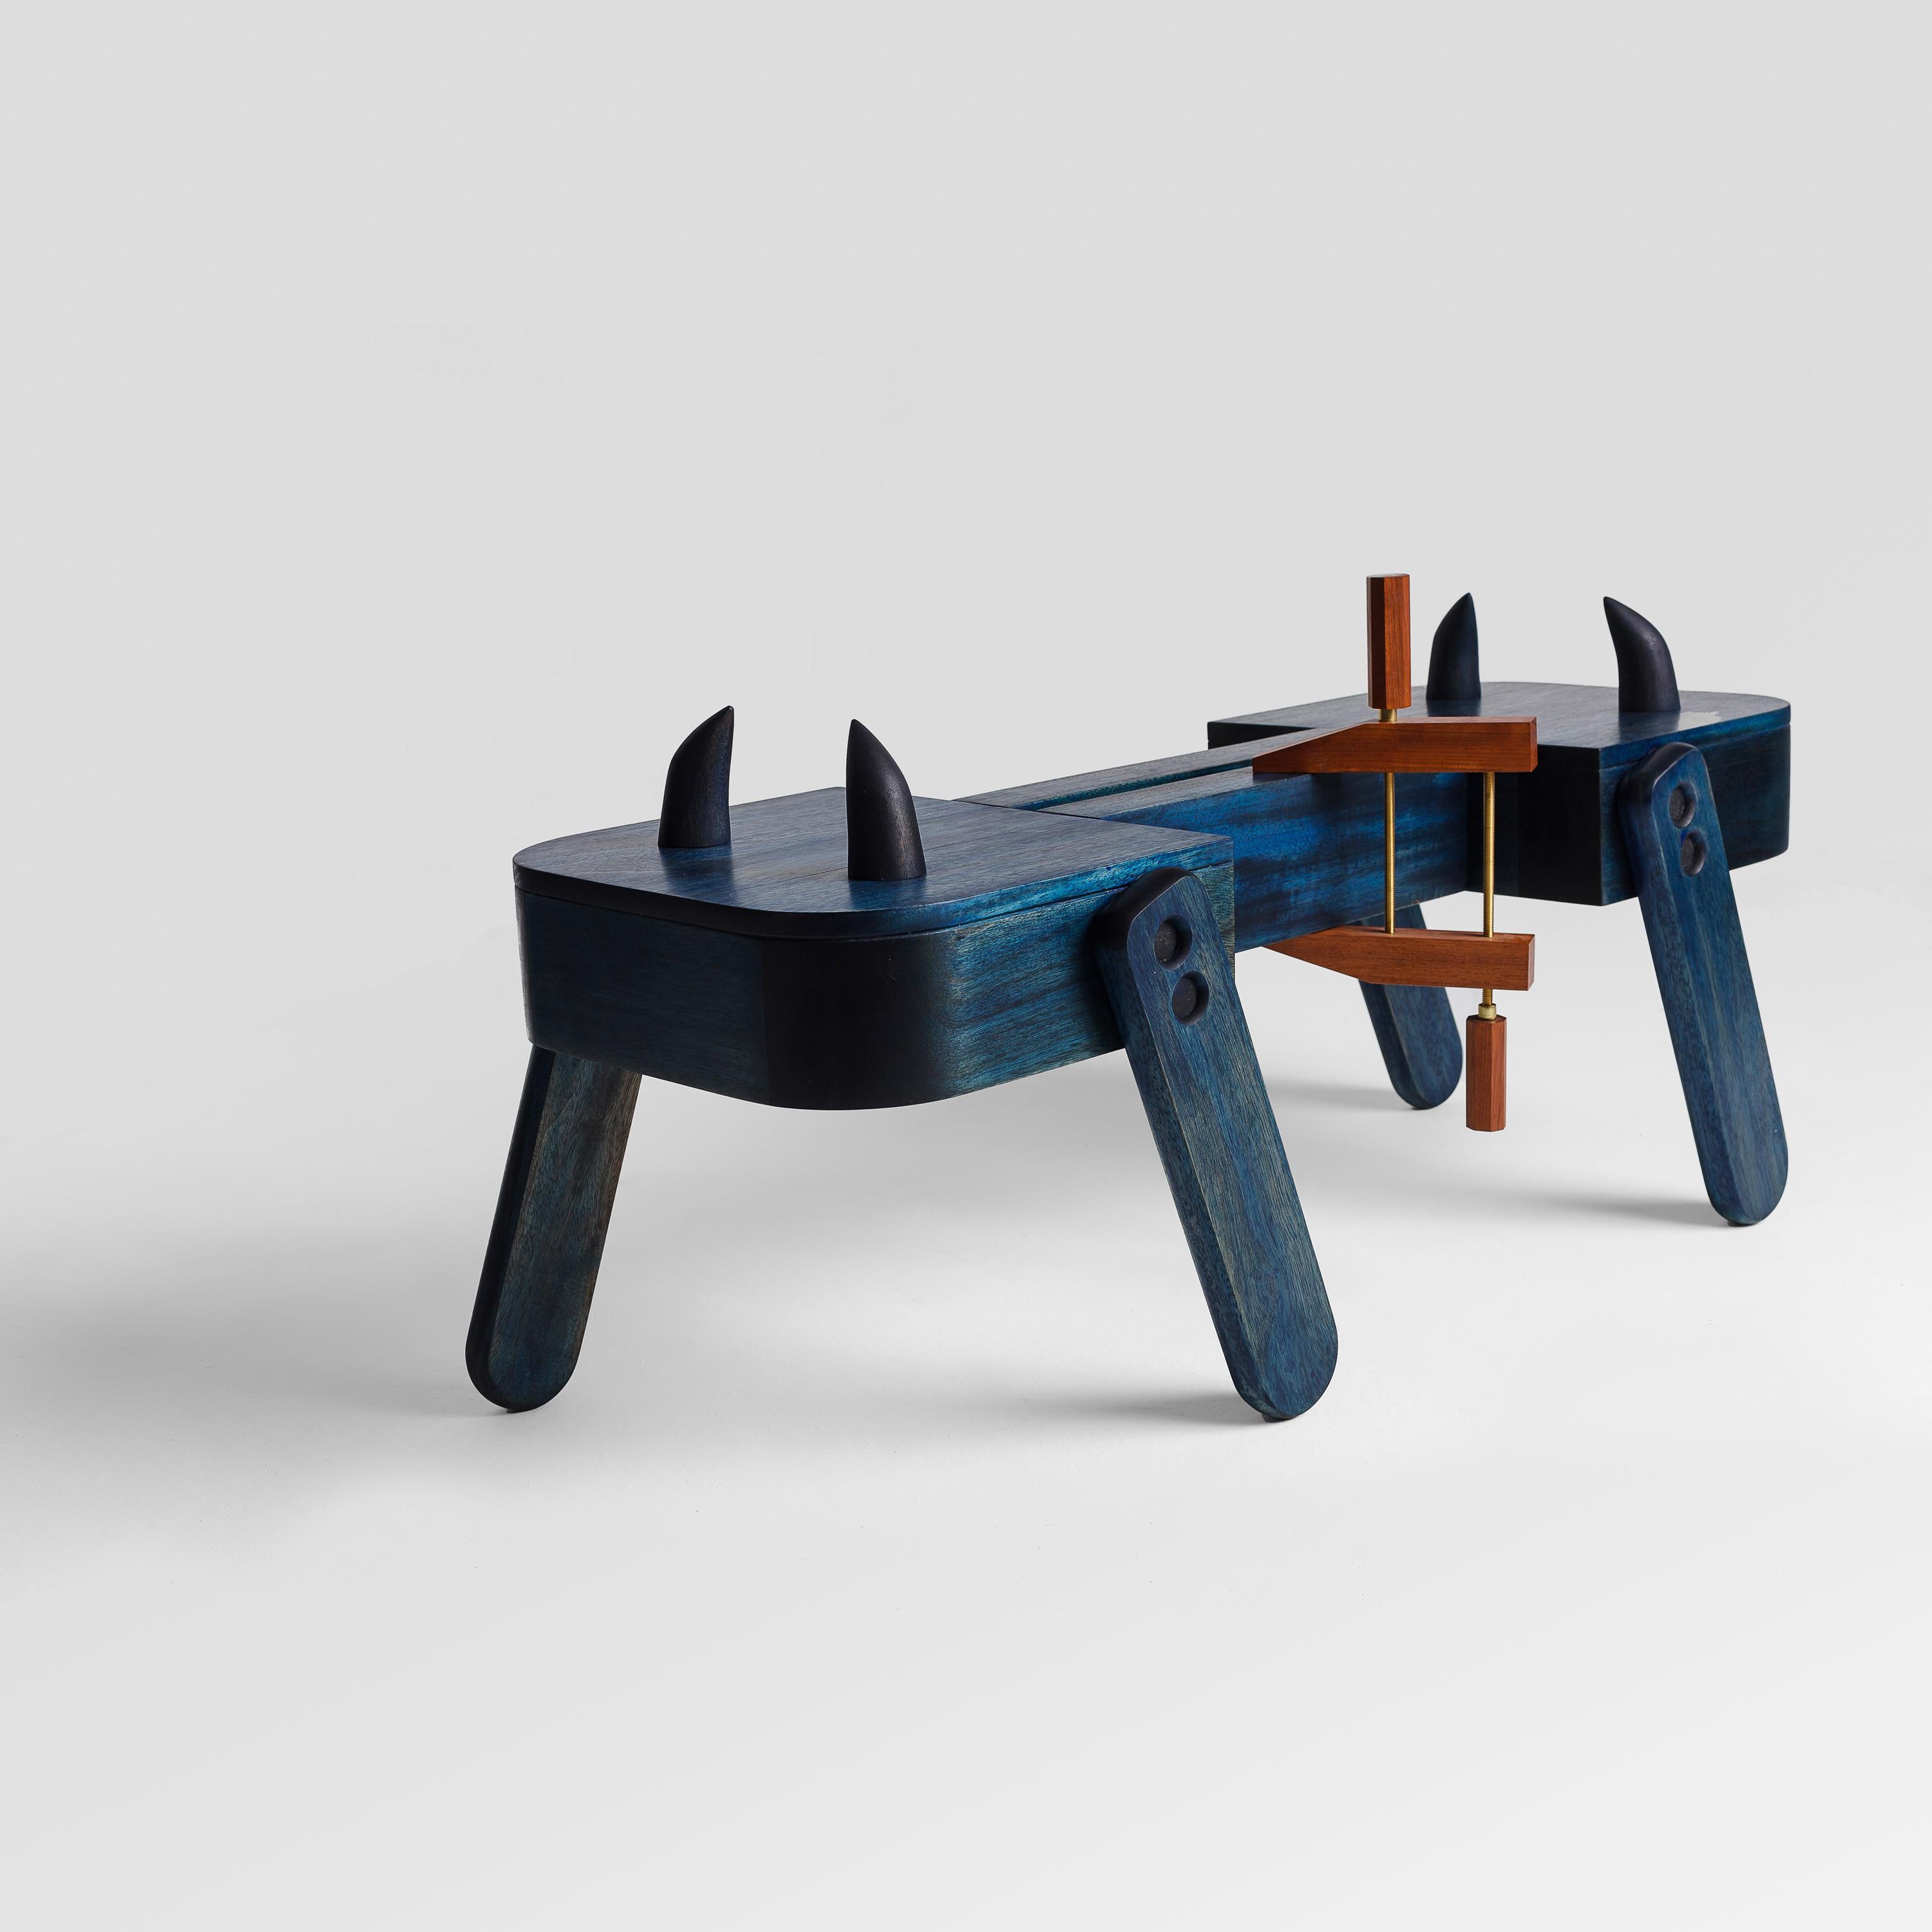 Sculpture-bench presented at the 12th São Paulo Design Week, in 2023, during the exhibition “How much time do we have?”. at the historic 